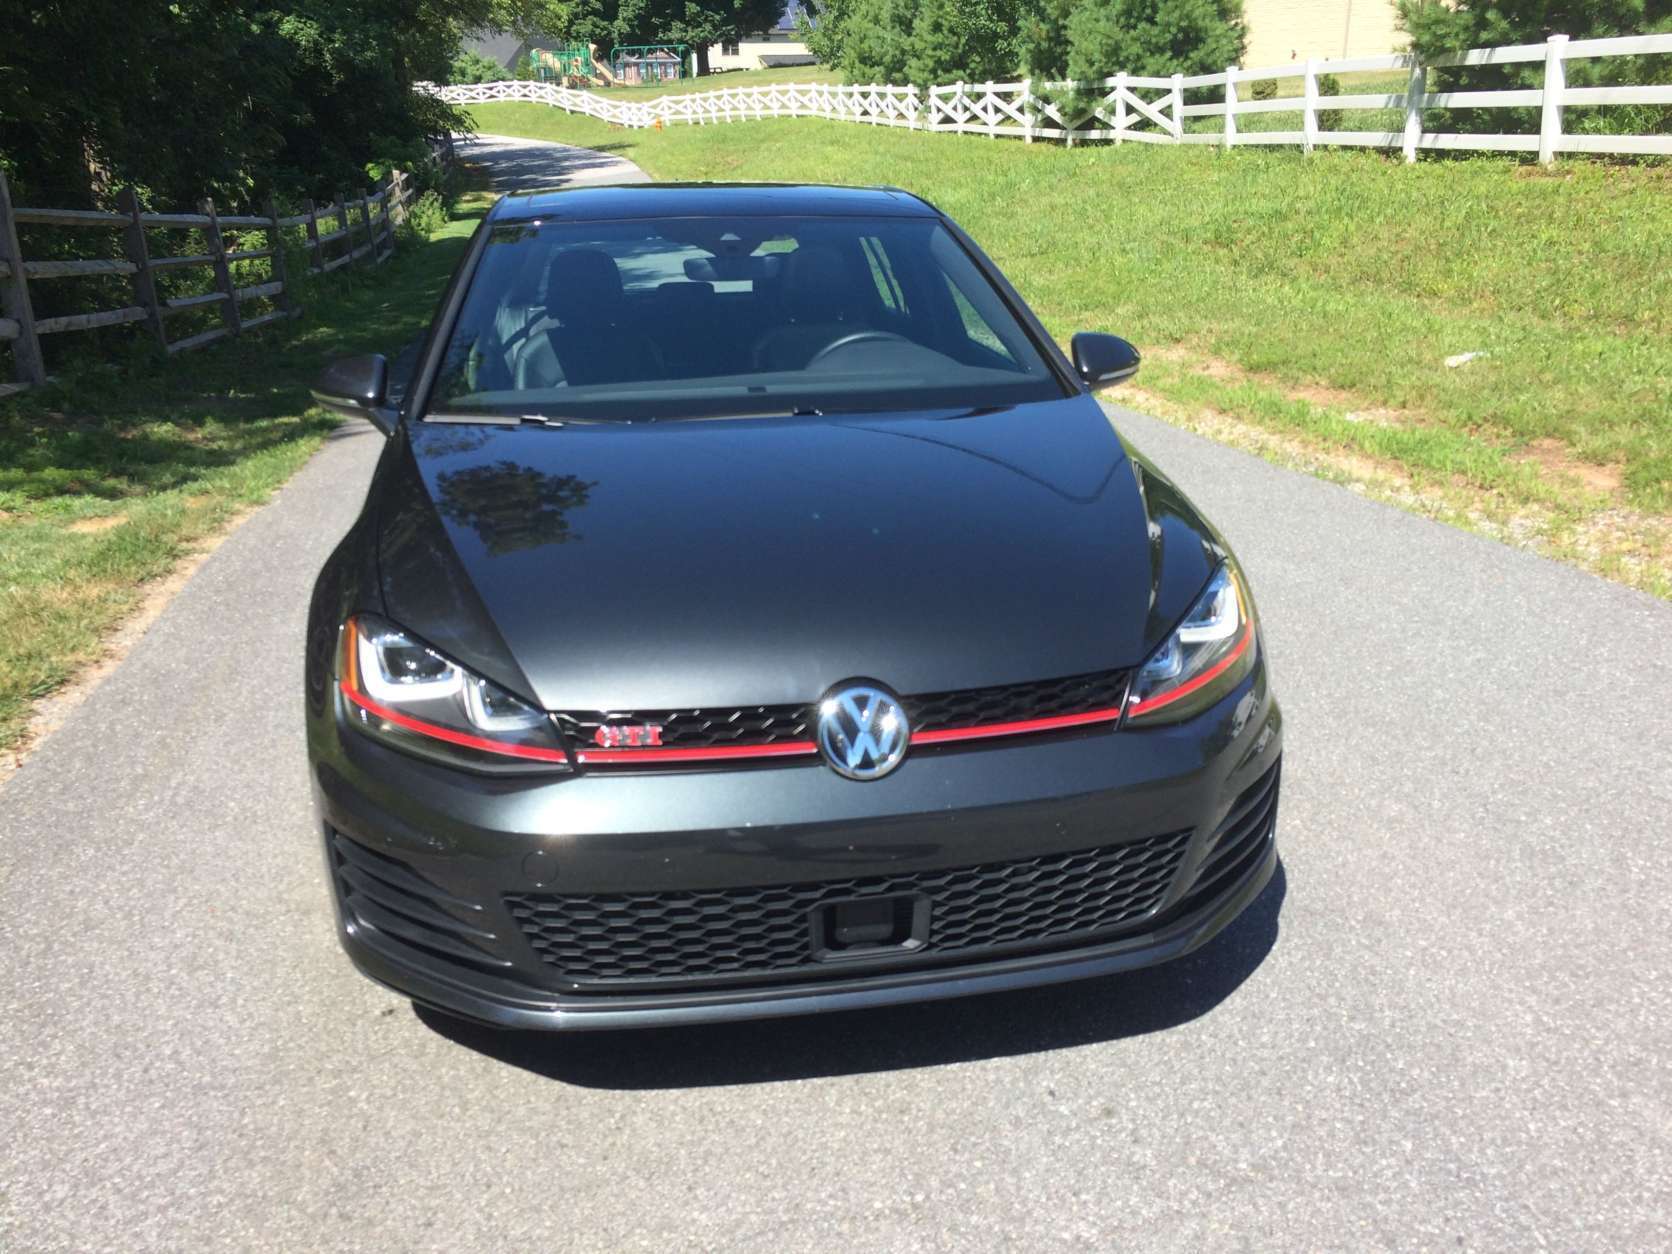 There are no huge wings or fake vents on the hood or body, which gives it a business-like attitude that sets this souped-up Golf apart. (WTOP/Mike Parris) 